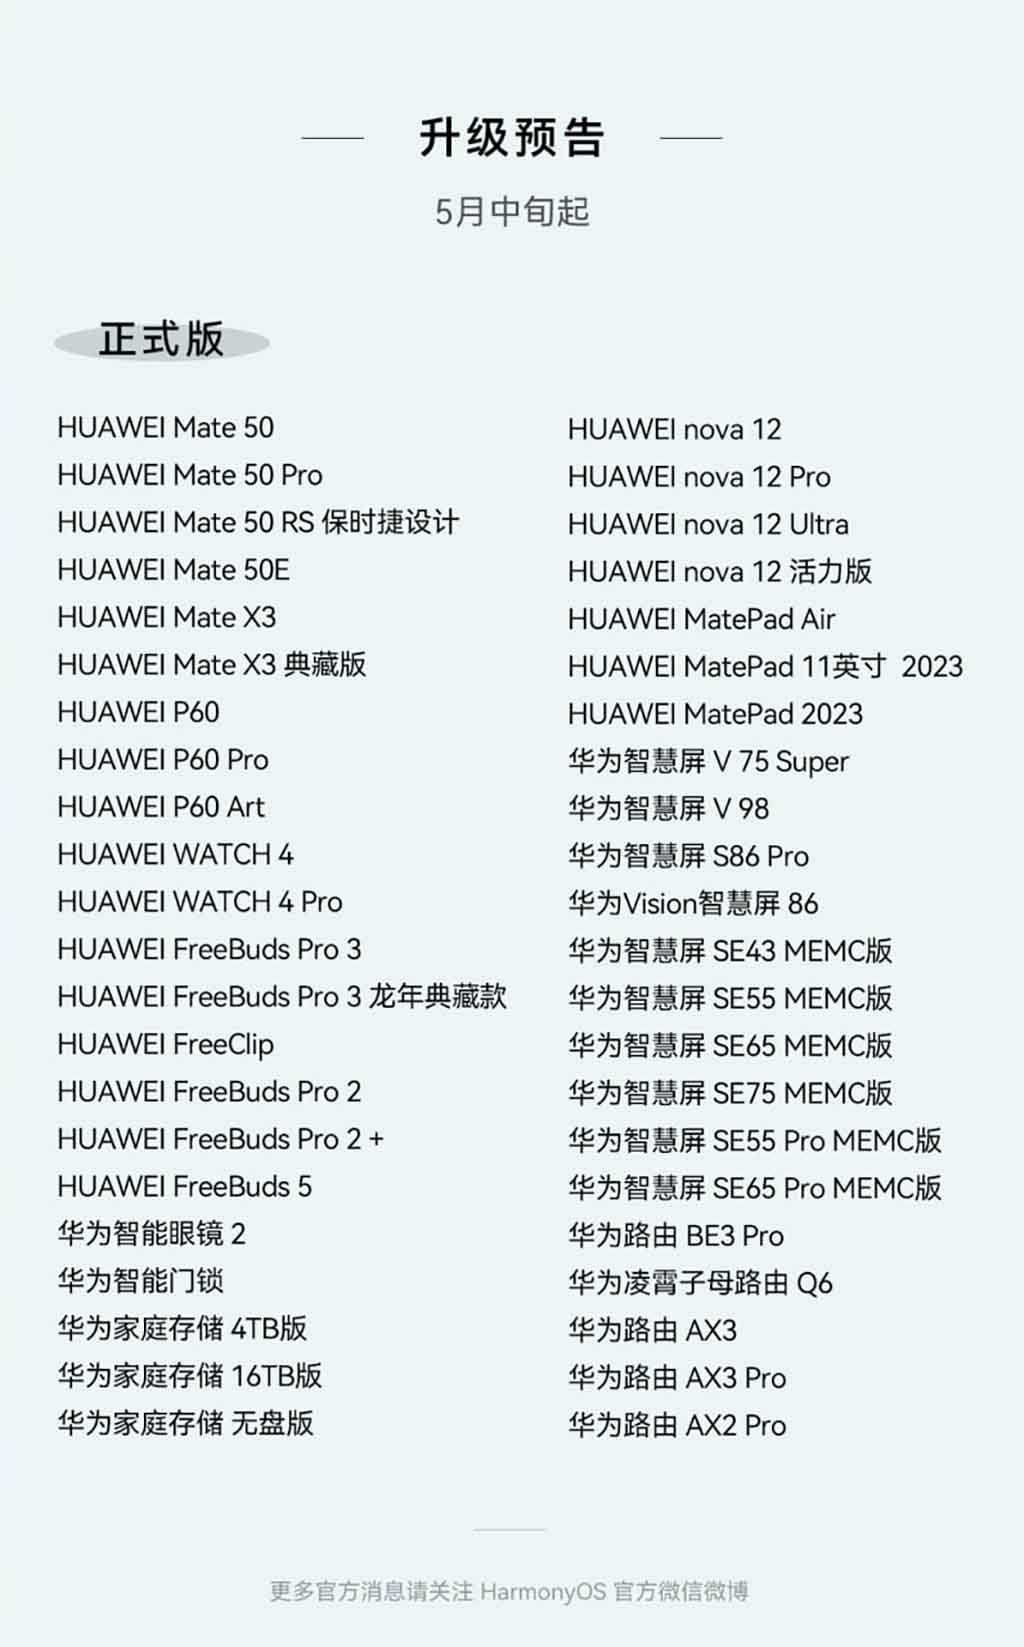 HarmonyOS 4.2 stable 21 Huawei devices